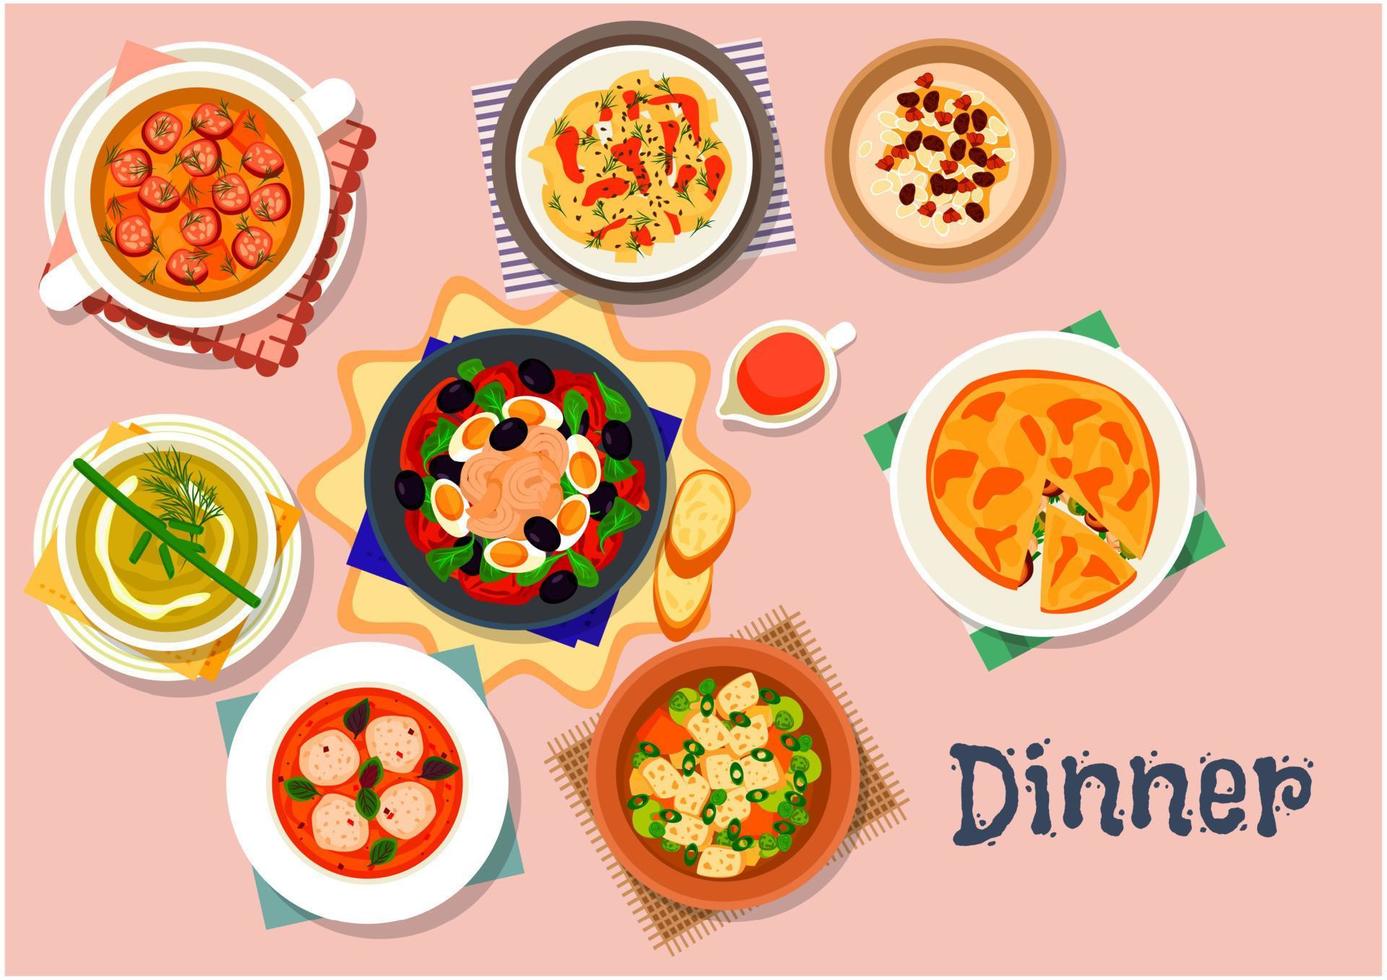 Tasty soup and salad icon for lunch menu design vector